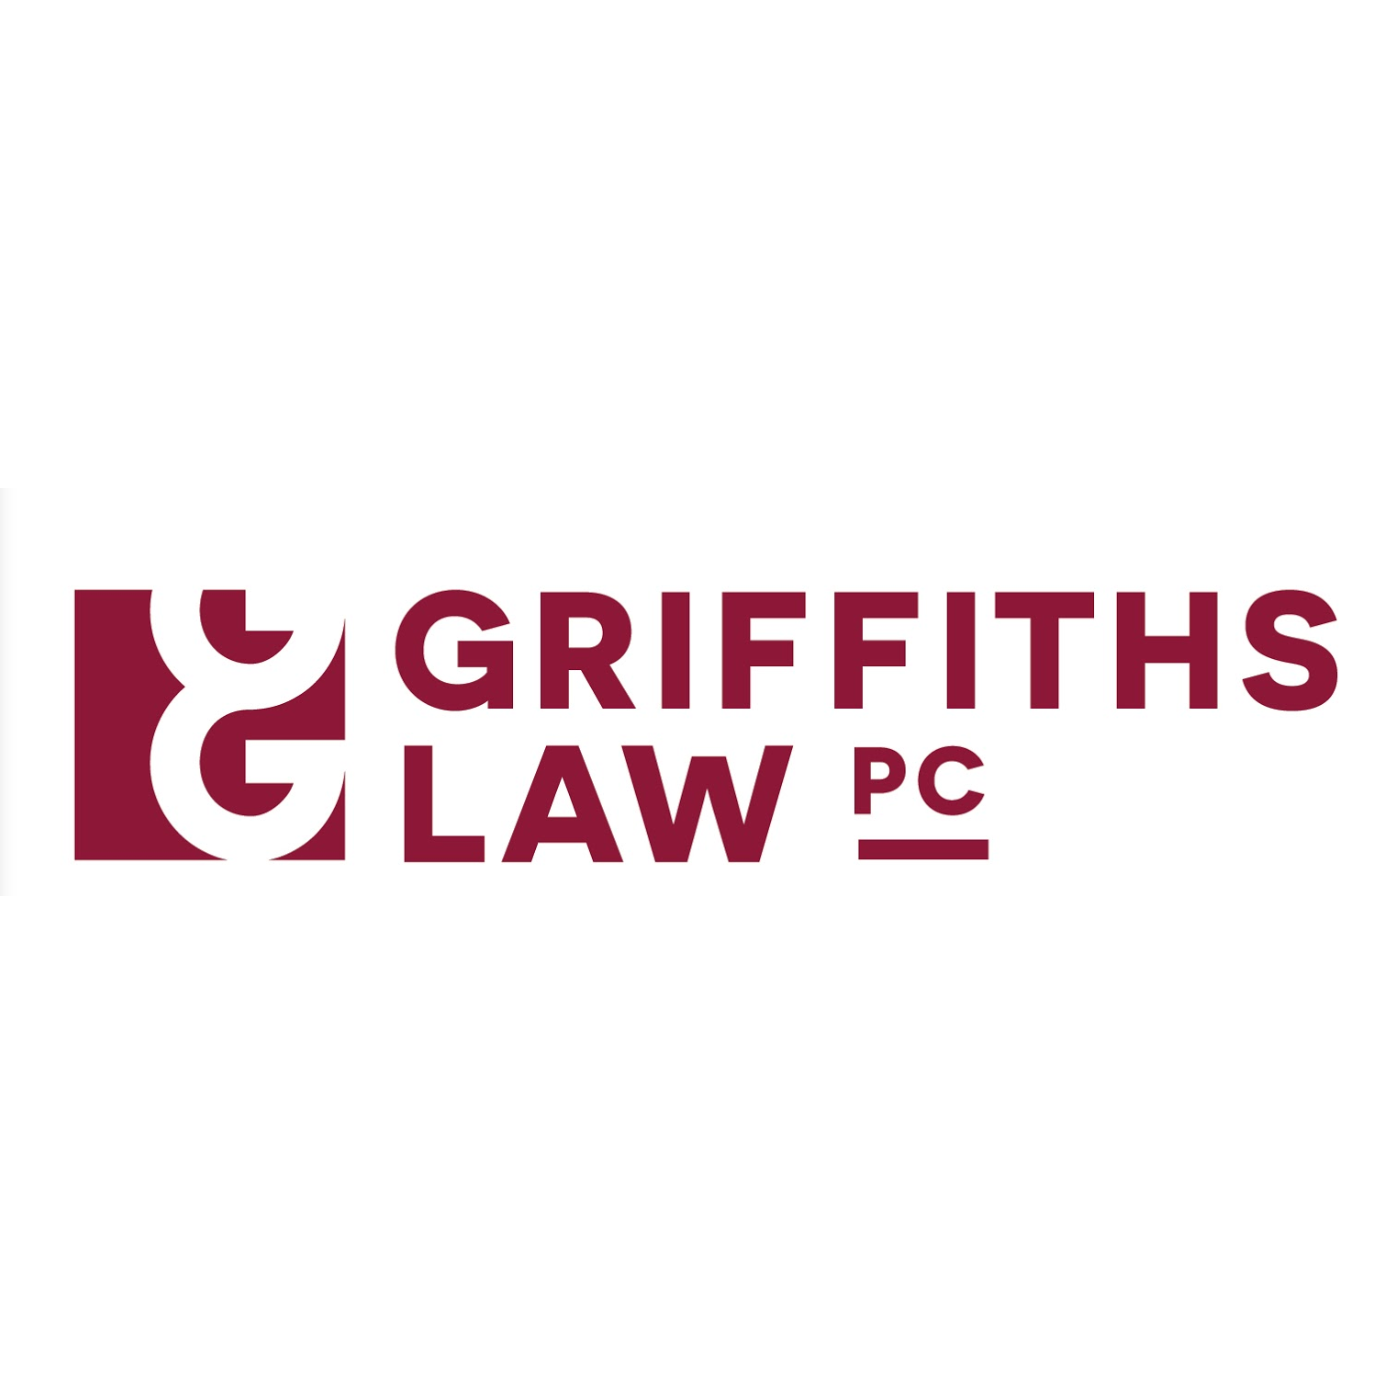 Griffiths Law PC - Lone Tree, CO 80124 - (303)858-8090 | ShowMeLocal.com